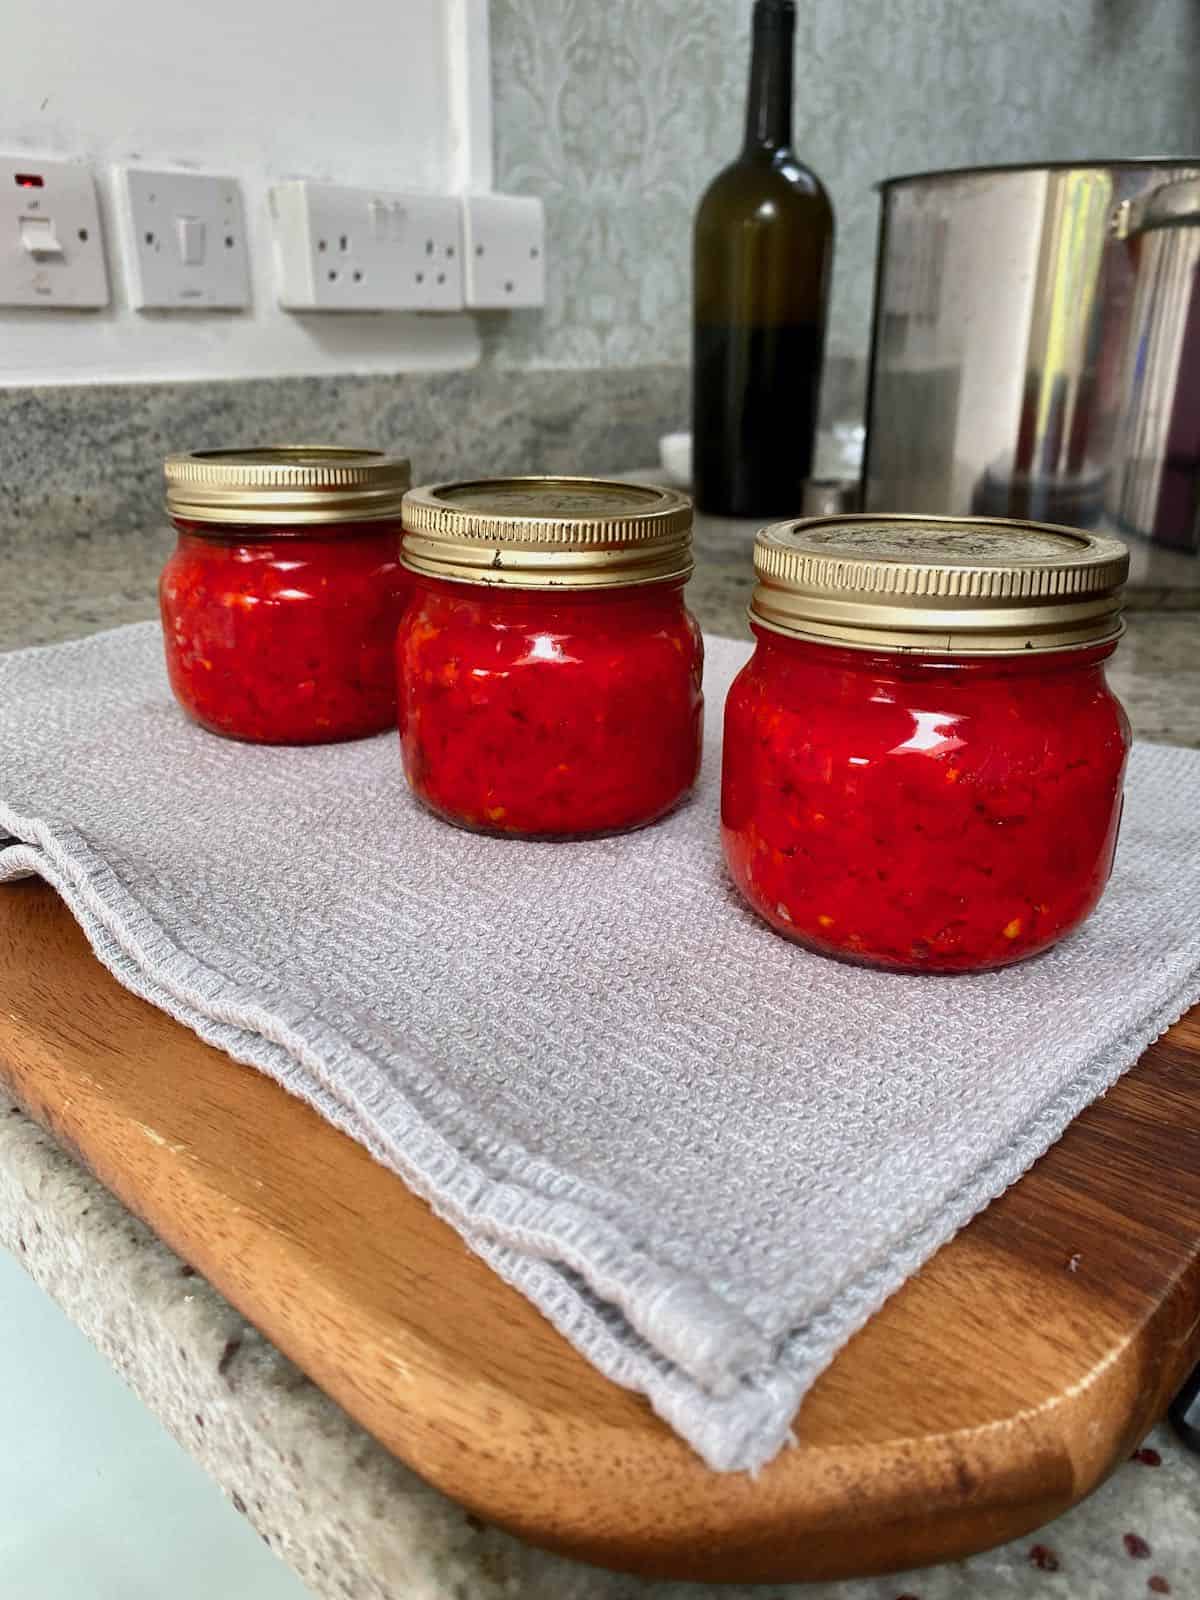 Three home-canned jars with red paste